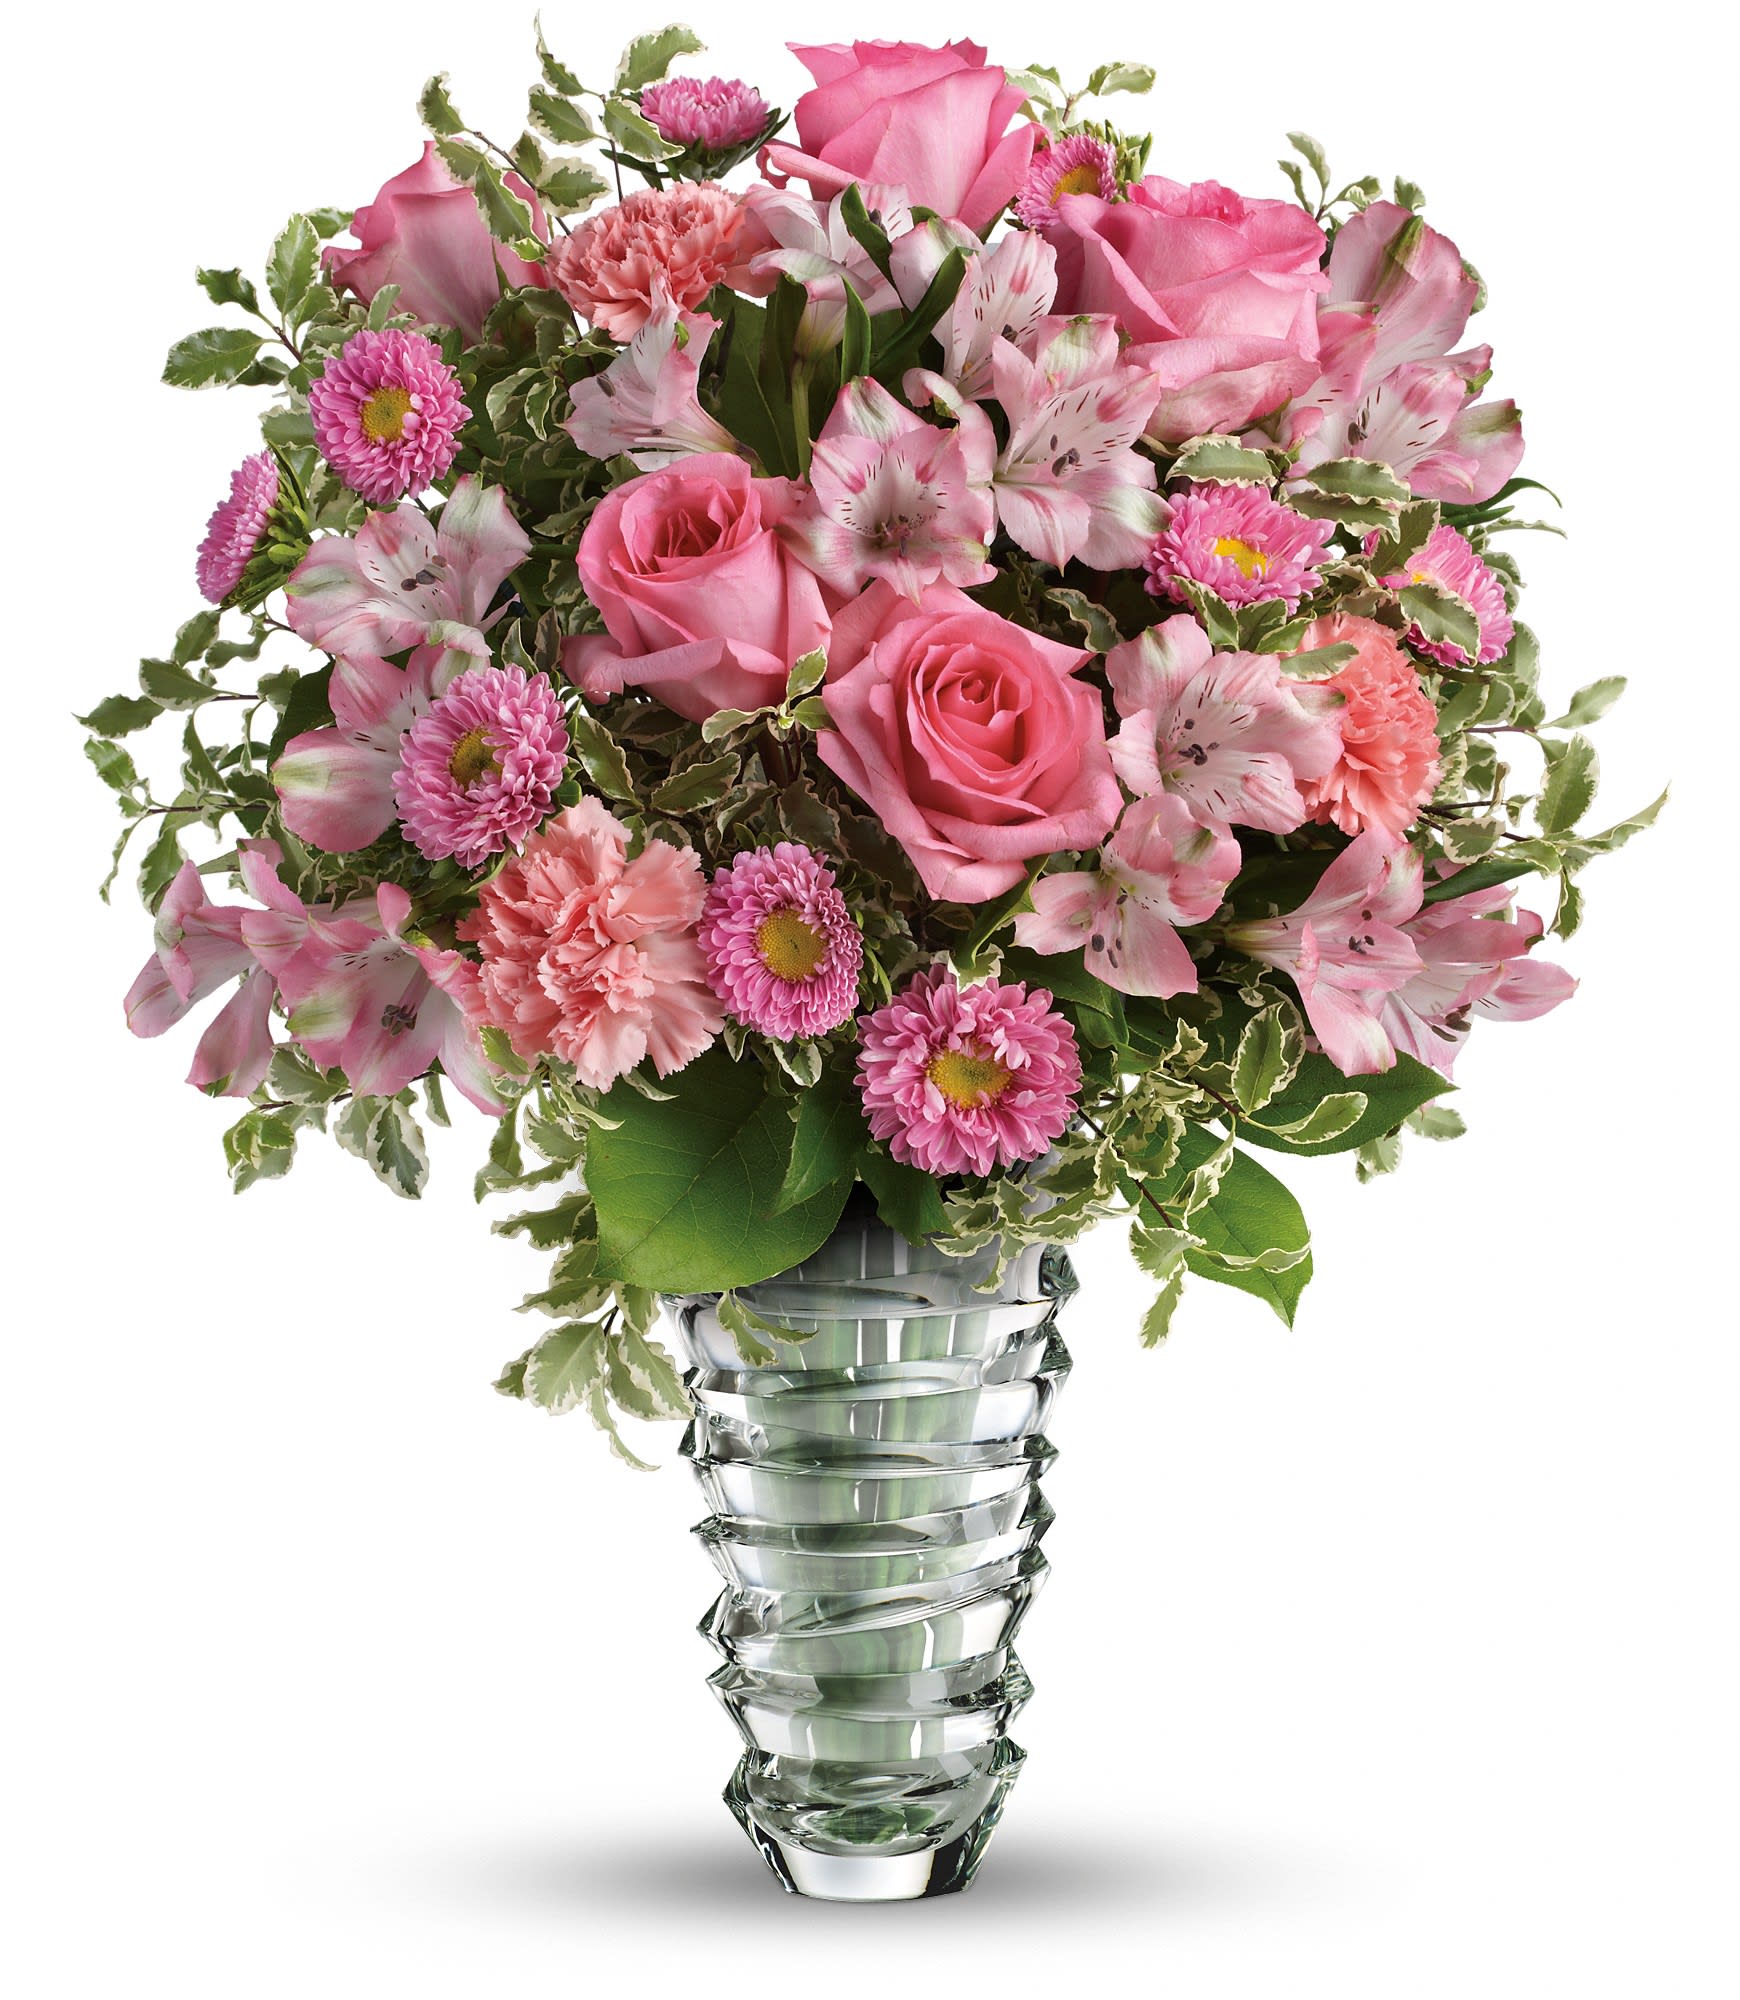 Teleflora's Rose Fantasy Bouquet - This heart-stopping arrangement of bright pink blooms in a Beautiful glass vase is what fantasies are made of!